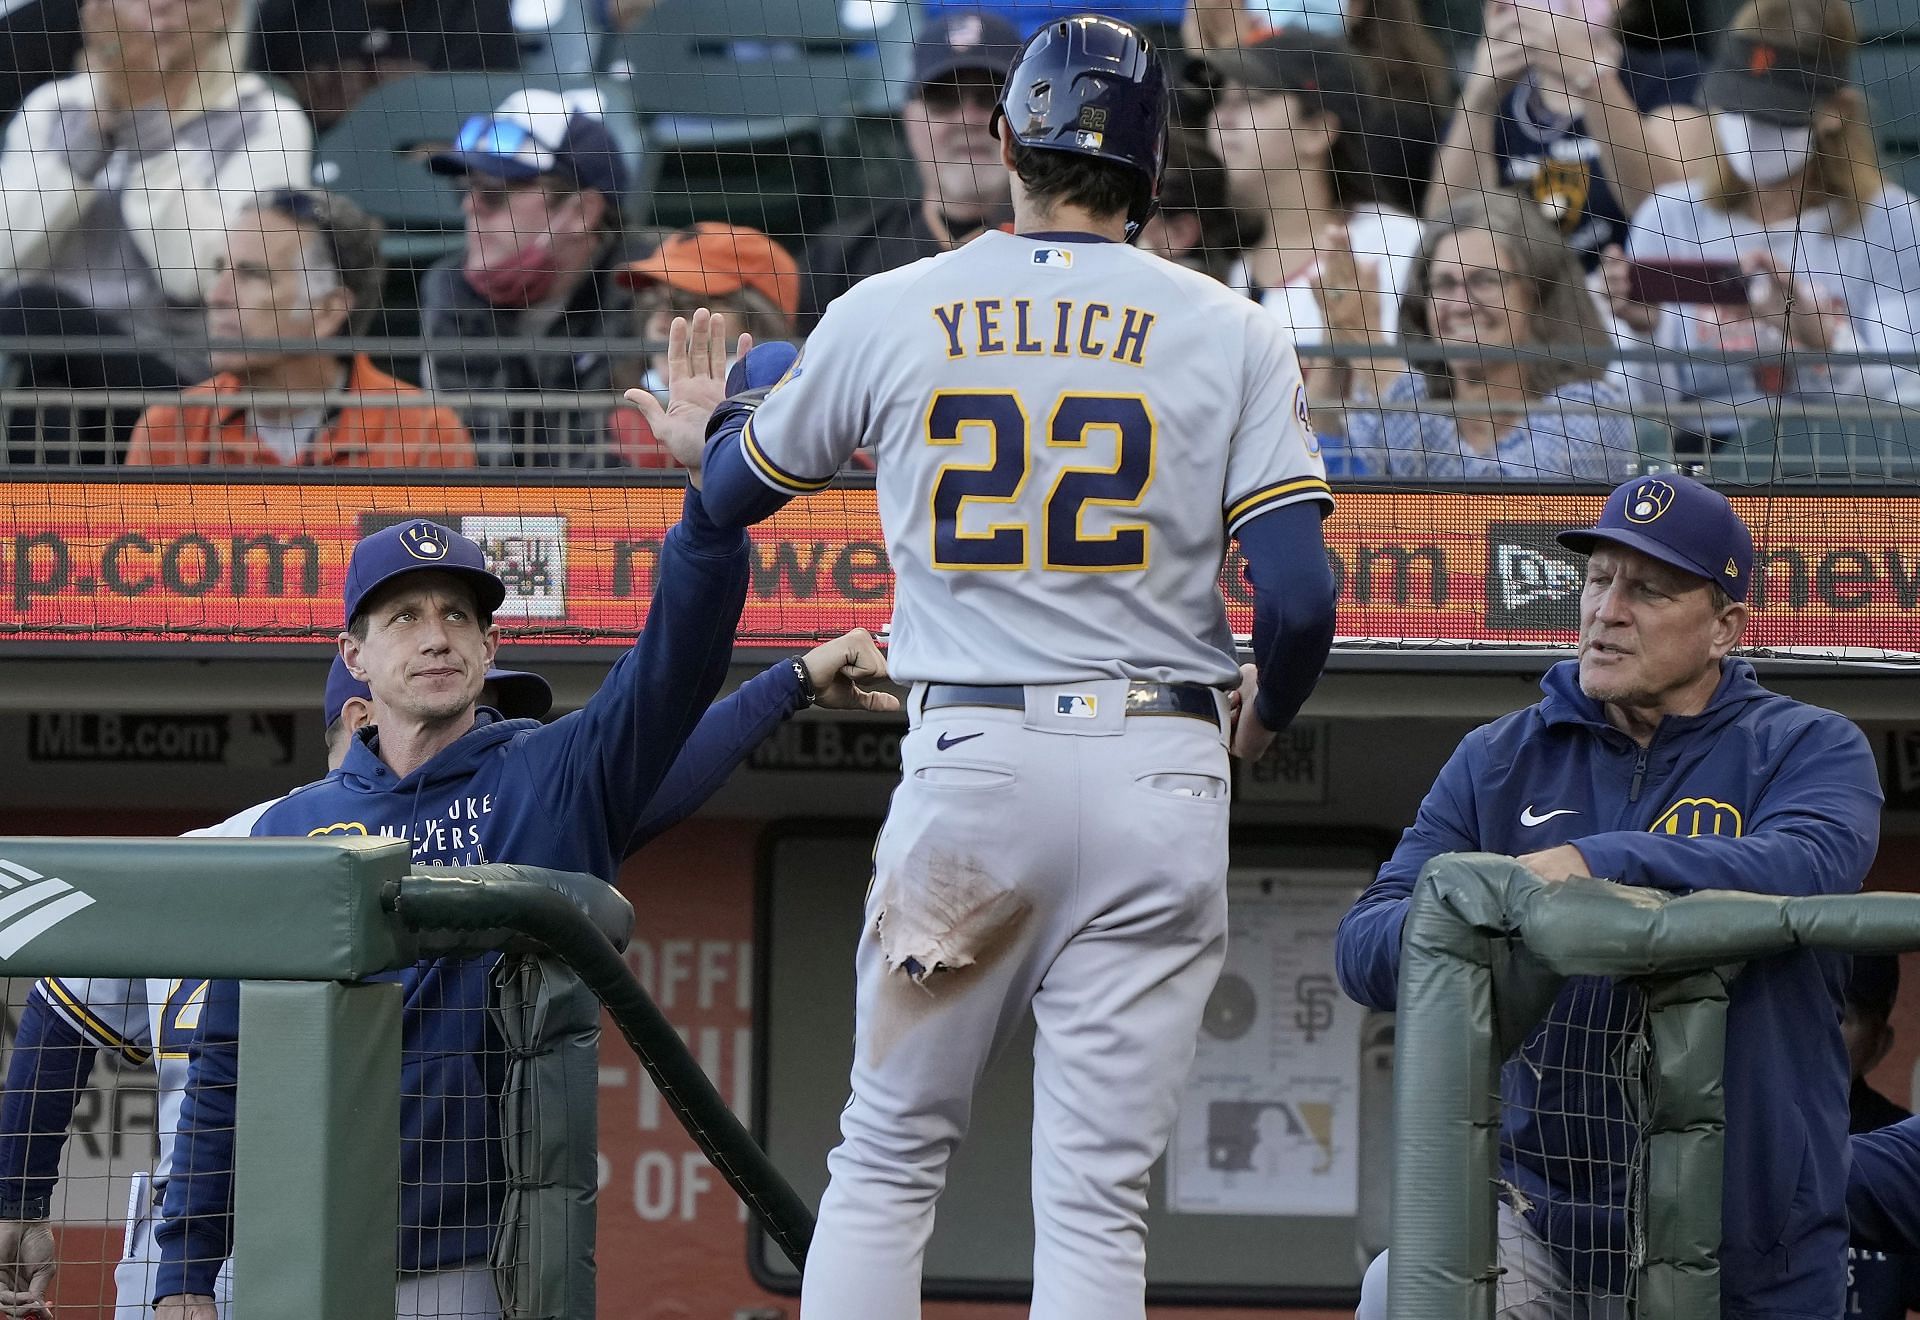 Christian Yelich of the Milwaukee Brewers is congratulated by manager Craig Counsell after scoring against the San Francisco Giants